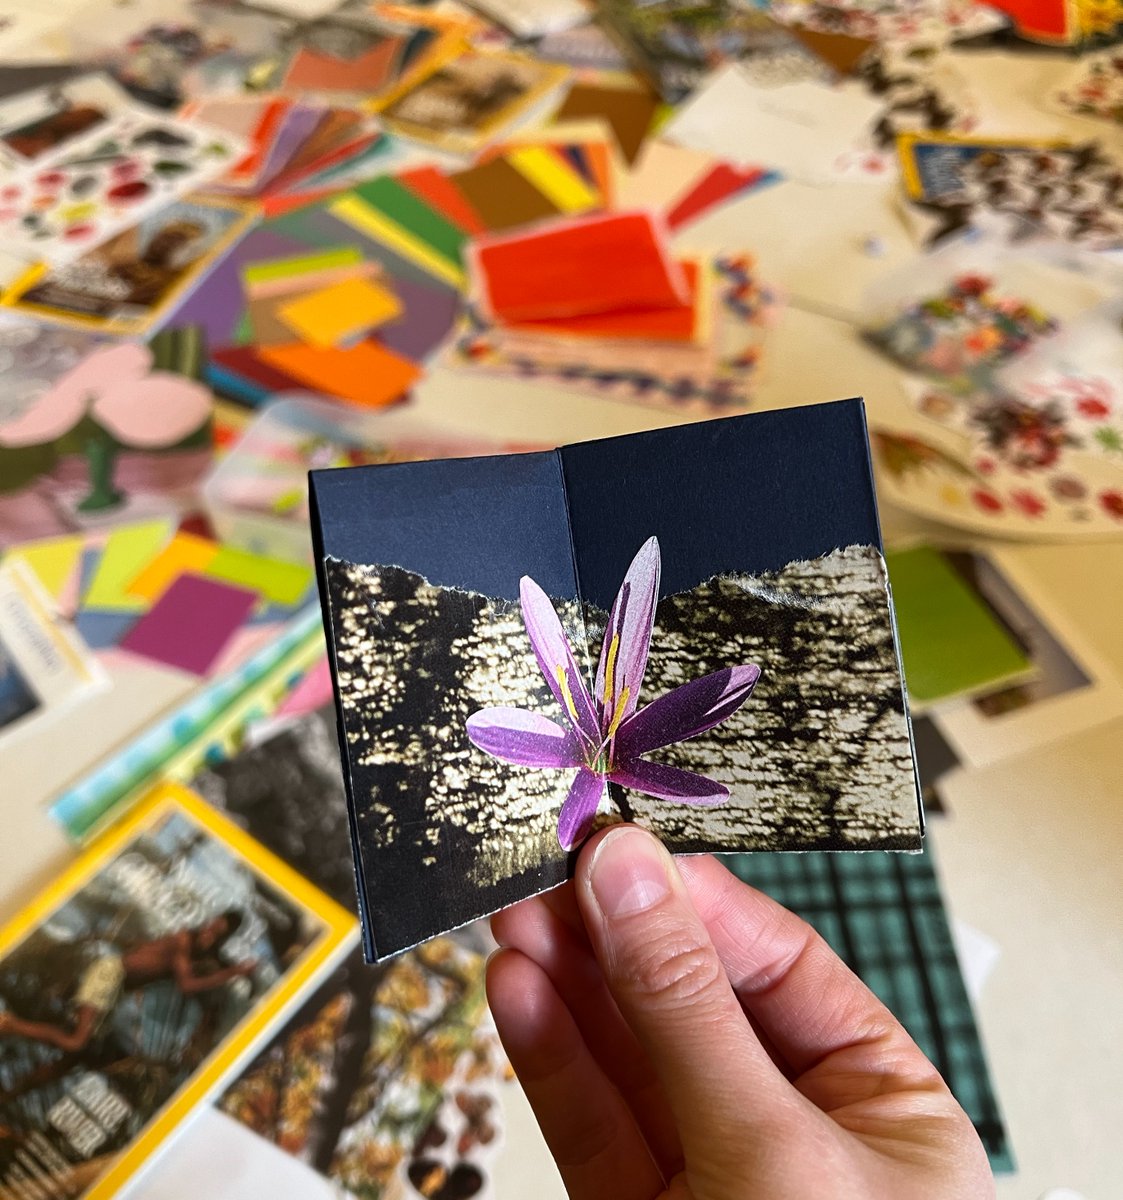 Join our next family event! Transport yourself into the future and imagine what flourishing and blossoming habitats will look like with @s_j_hartman's Collage Club this Feb half-term. Booking is now live! More info on our website: bit.ly/3TH3tGg #collage #camdenhalfterm